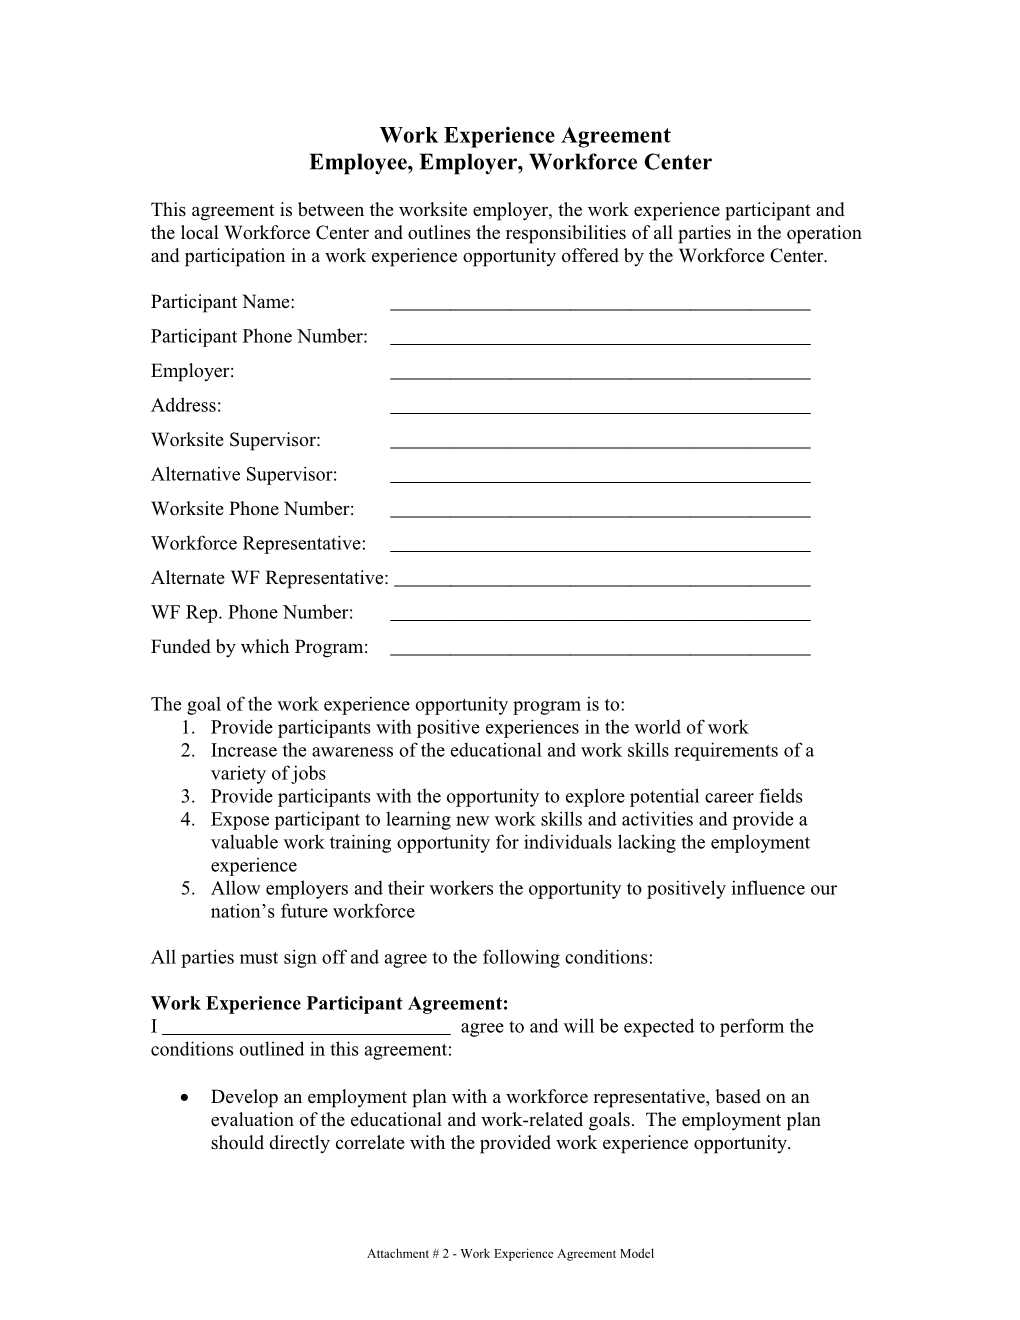 Work Experience Agreement